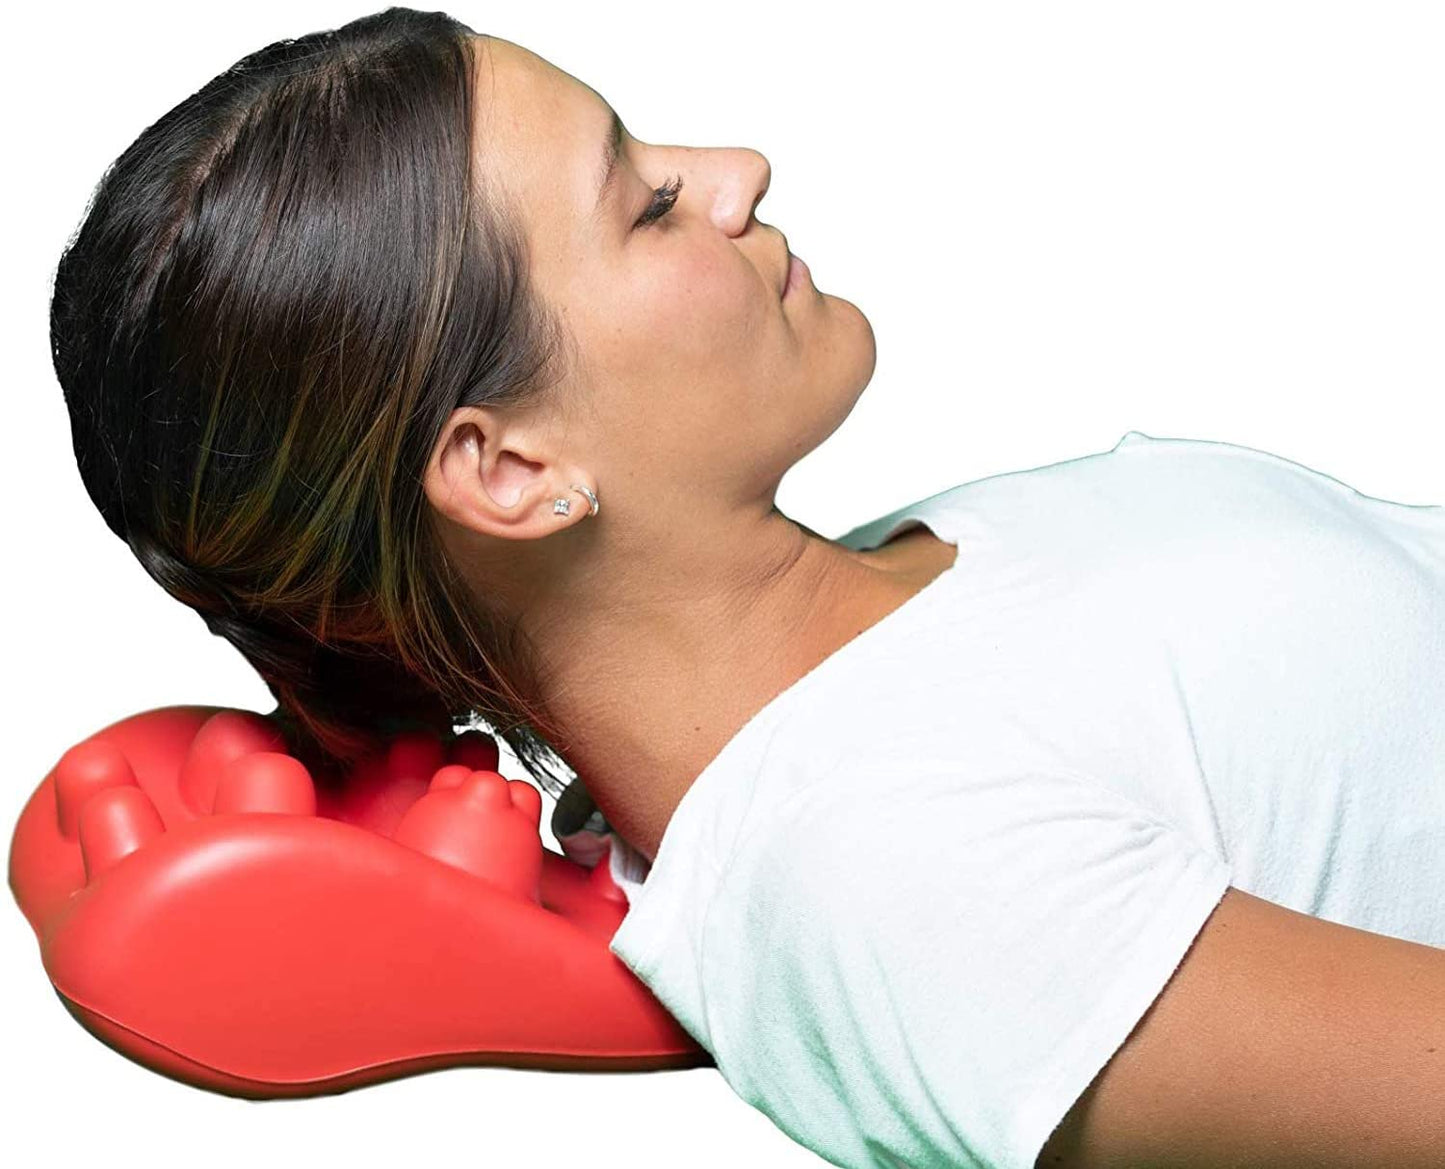 Neck Stretch Massage Trigger Point Chiropractic Pillow by Acupillow - Cervical Traction Stretcher Device - Myofascial Release of Pressure Point - Neck Pain